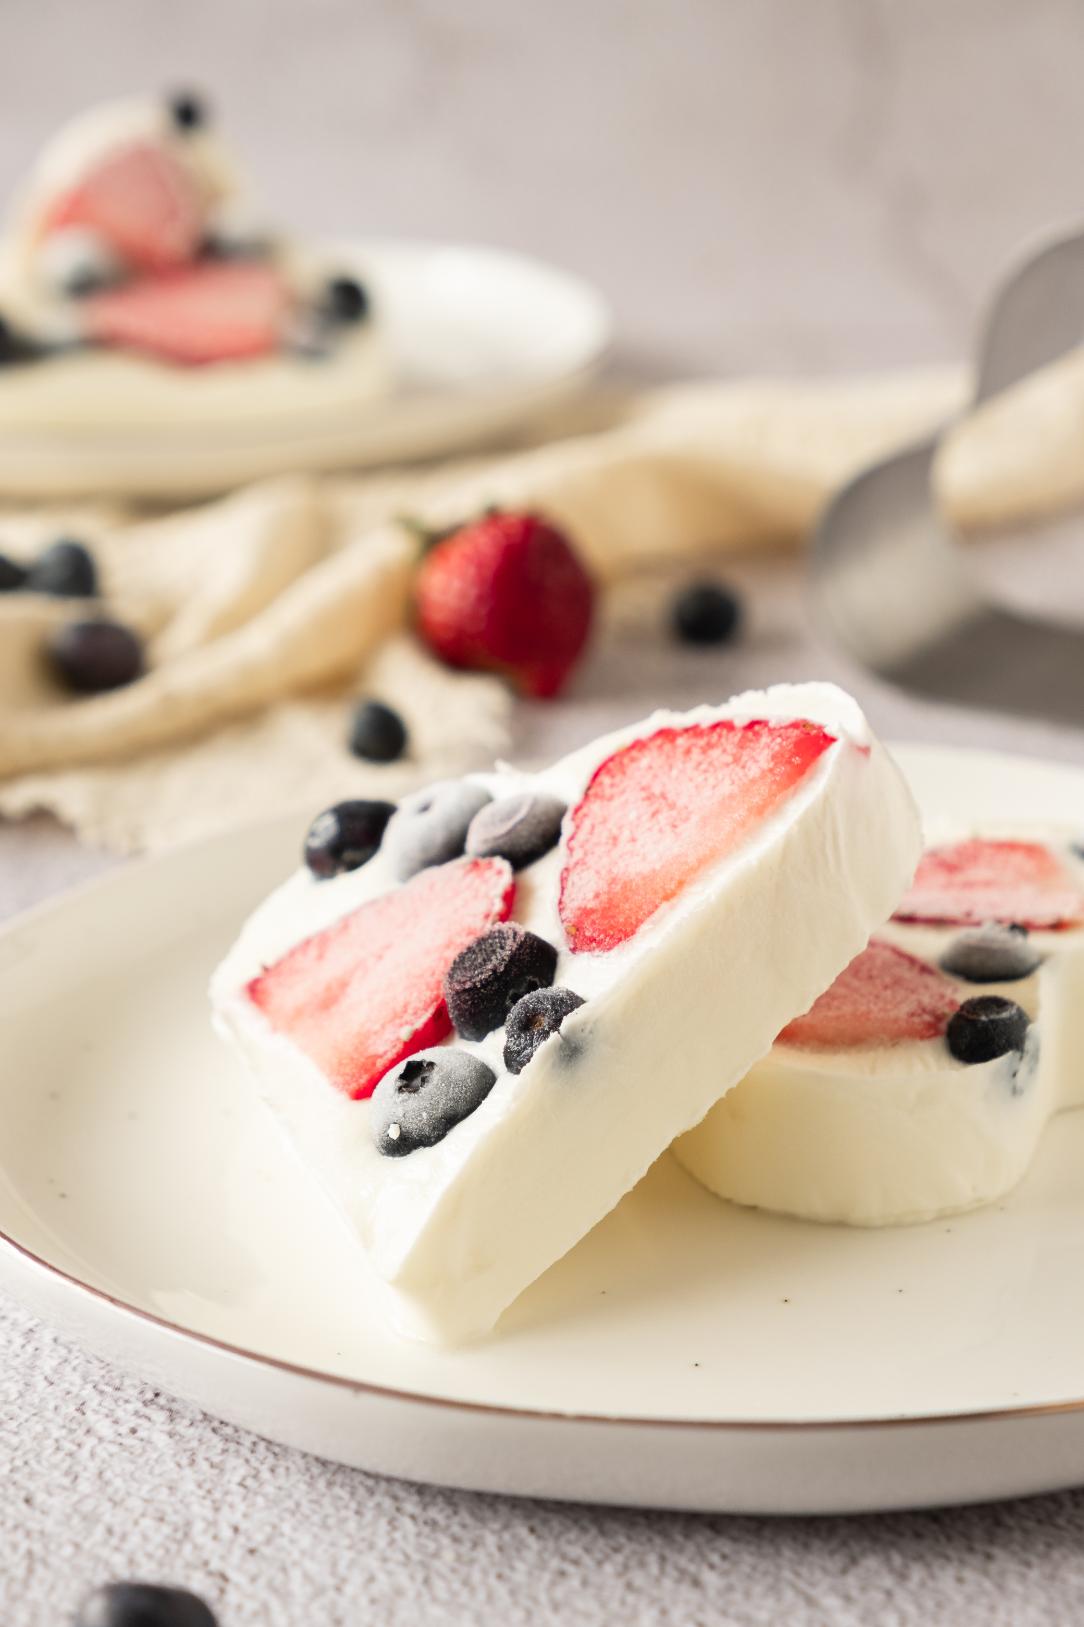 An up close shot of two heart shaped yogurt barks served on a white plate